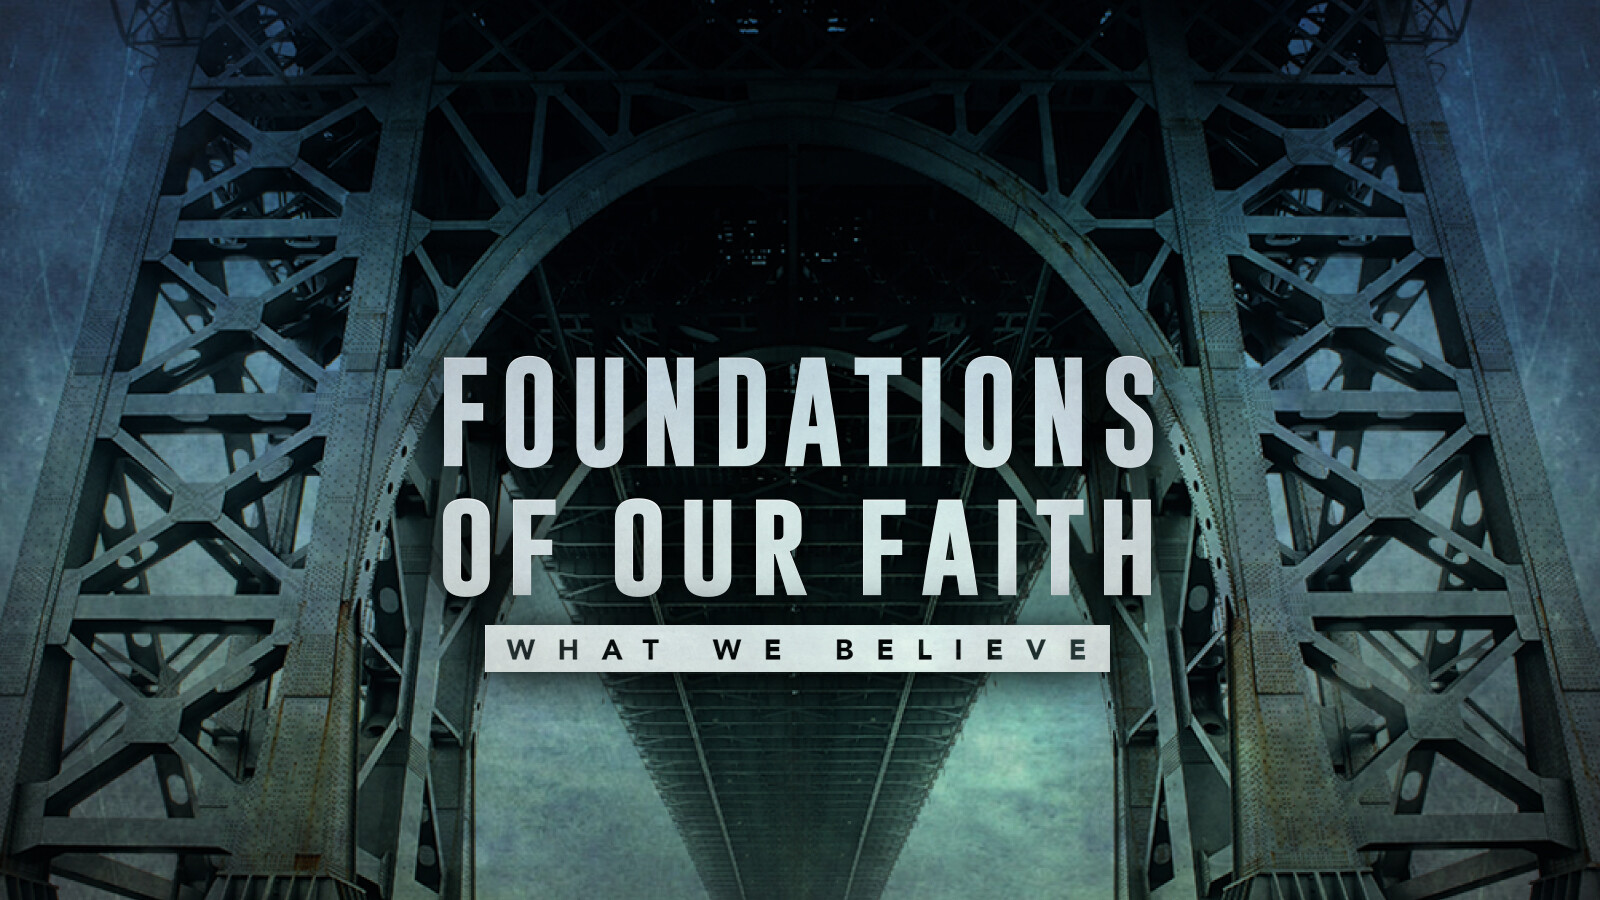 Foundations: What We Believe